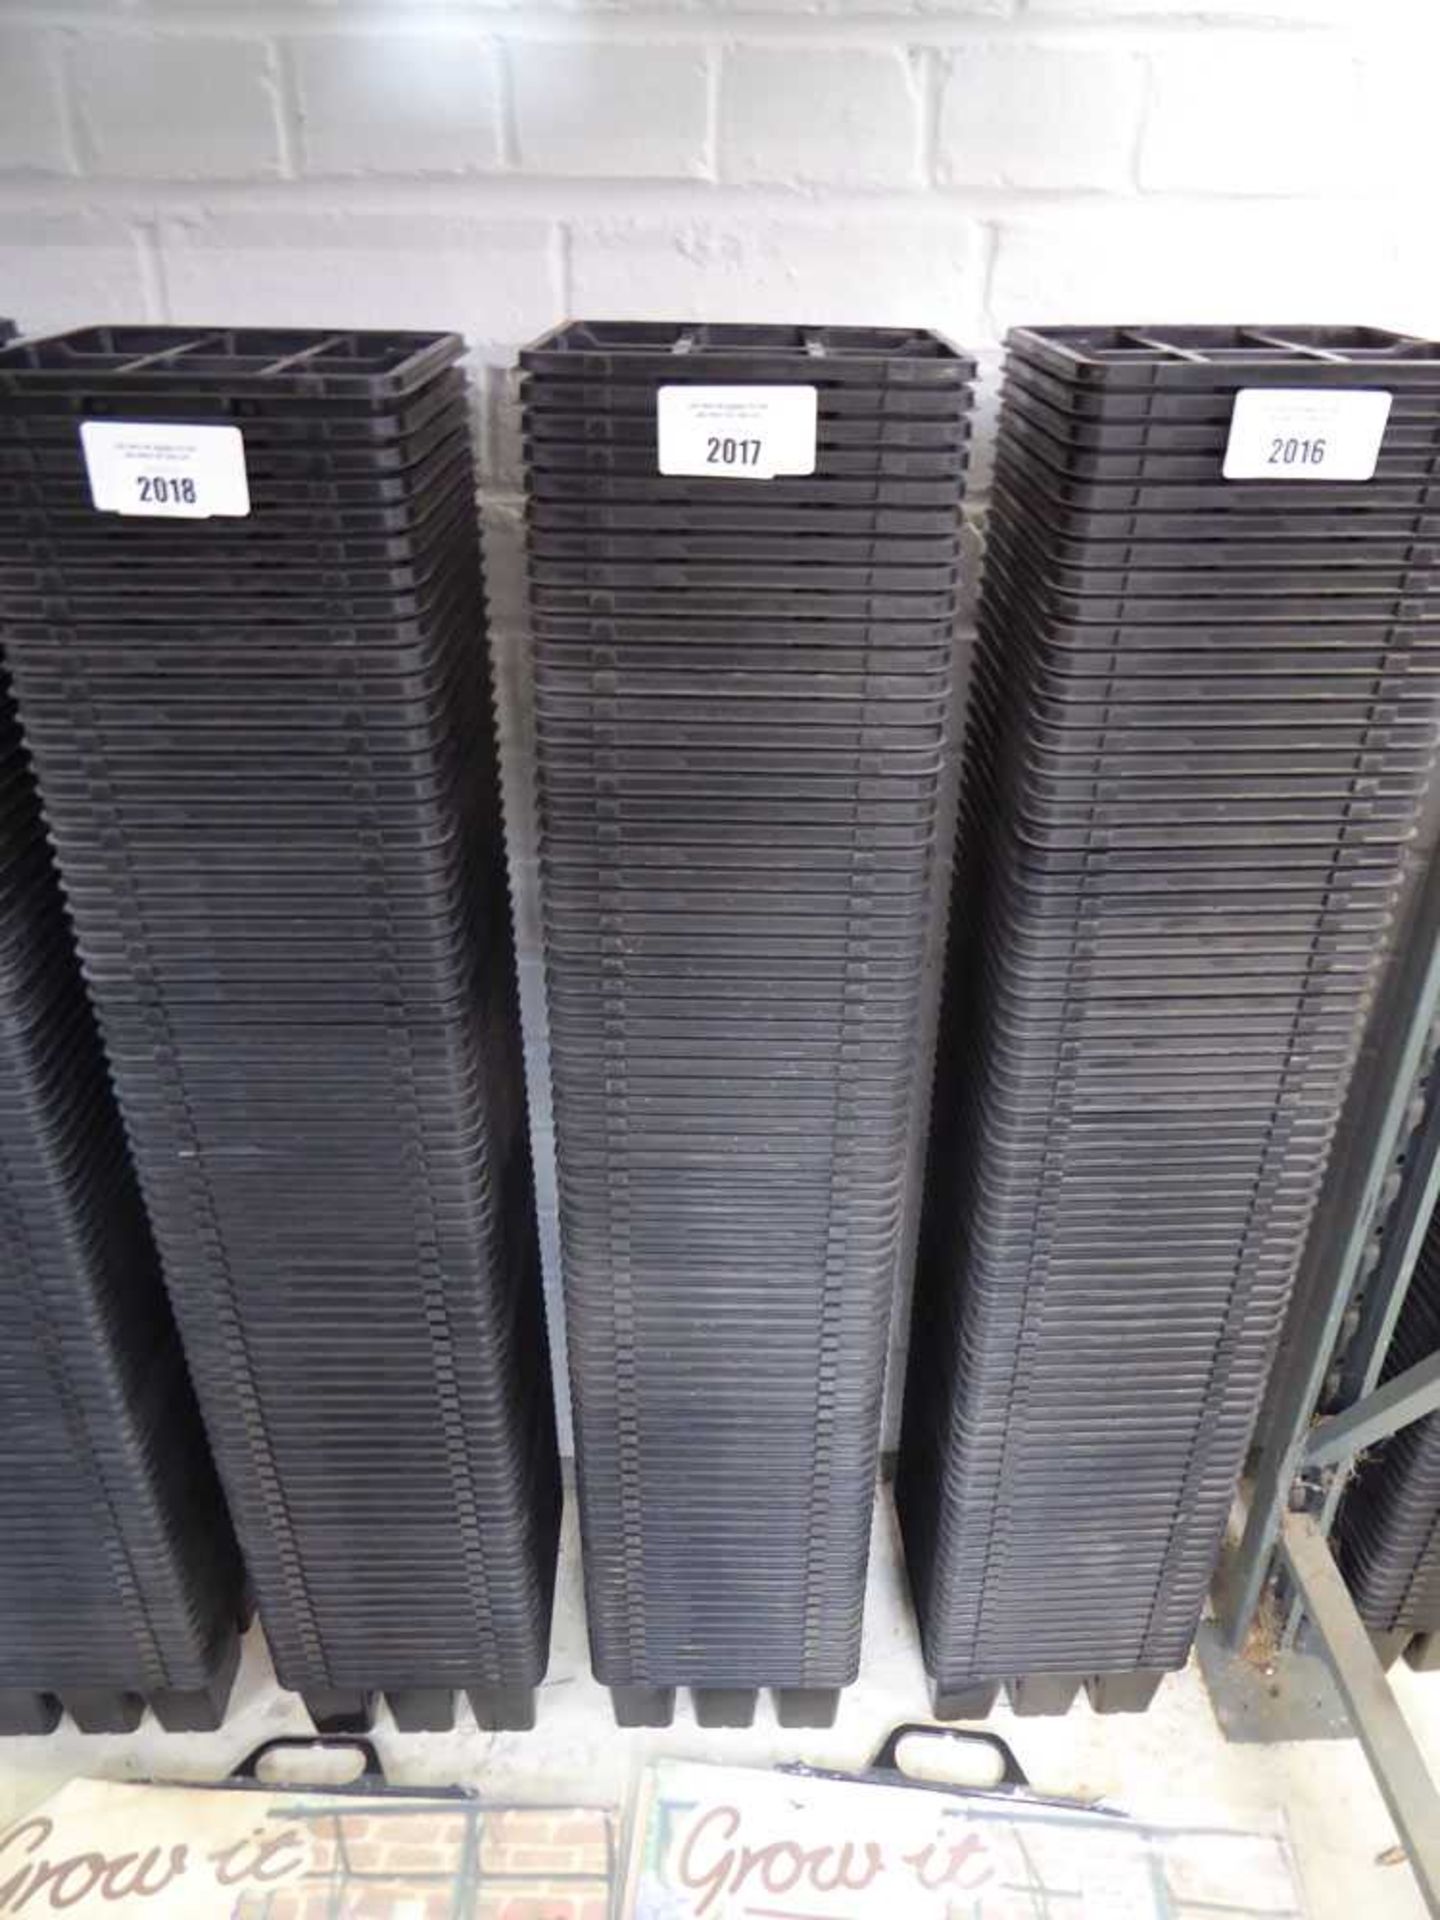 +VAT Approximately 74, 6-grill plant cell trays